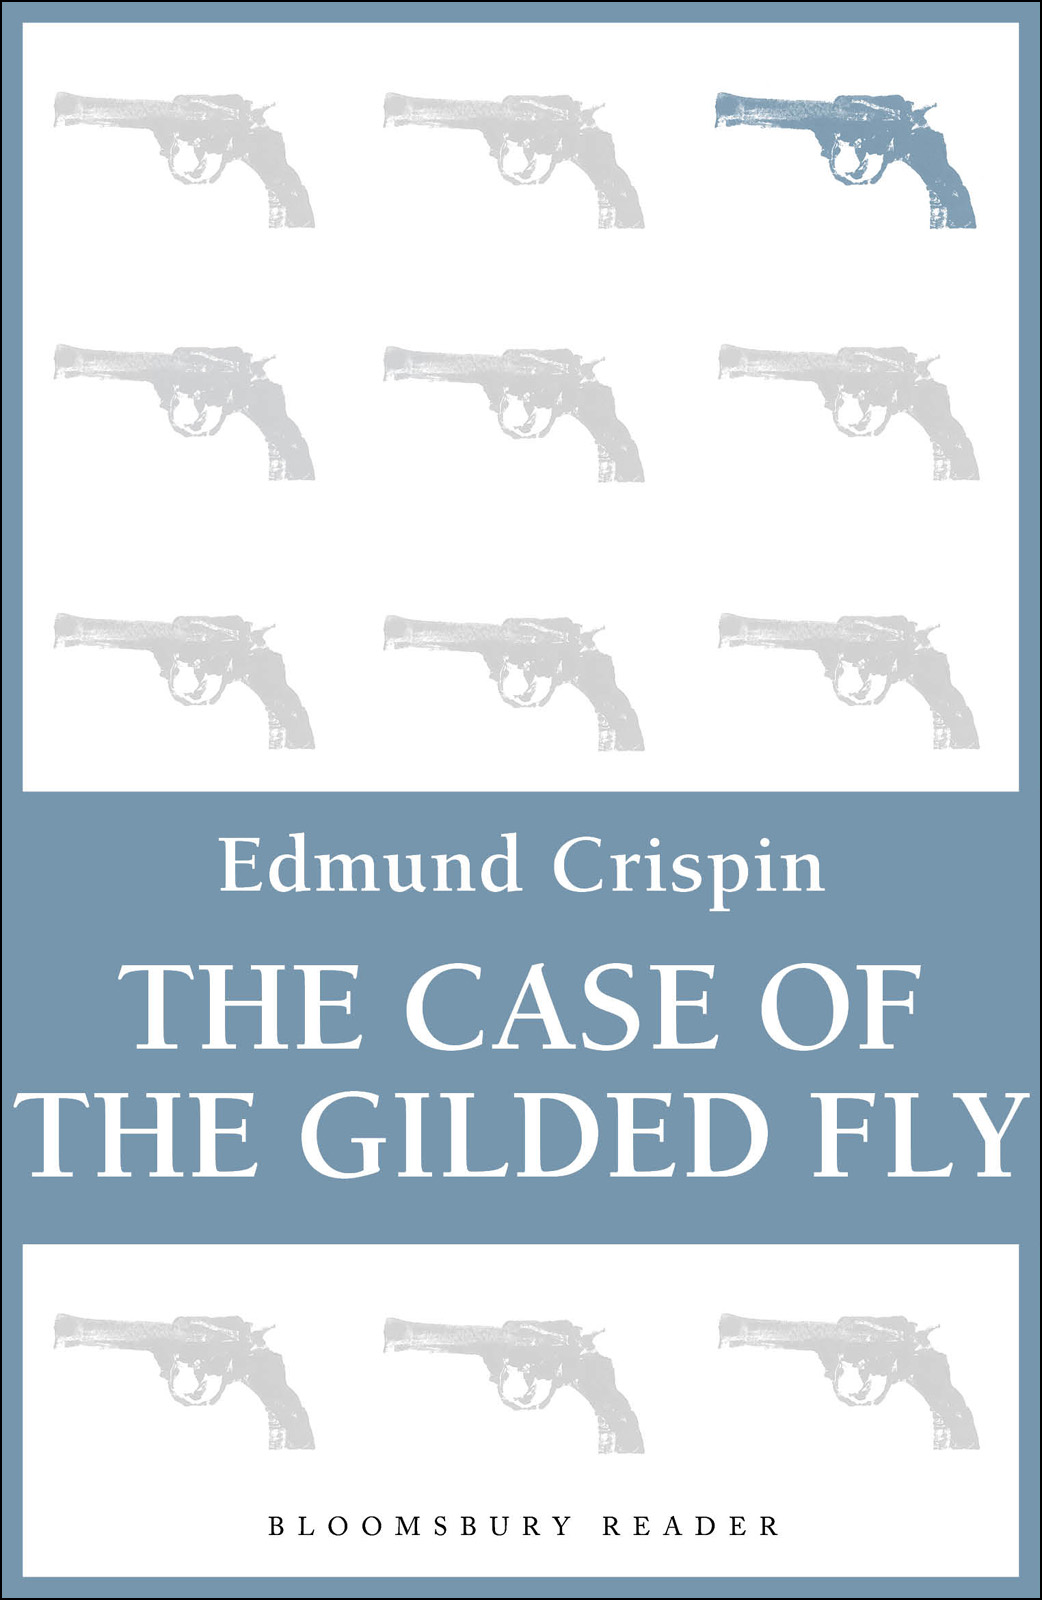 The Case of the Gilded Fly (2009)